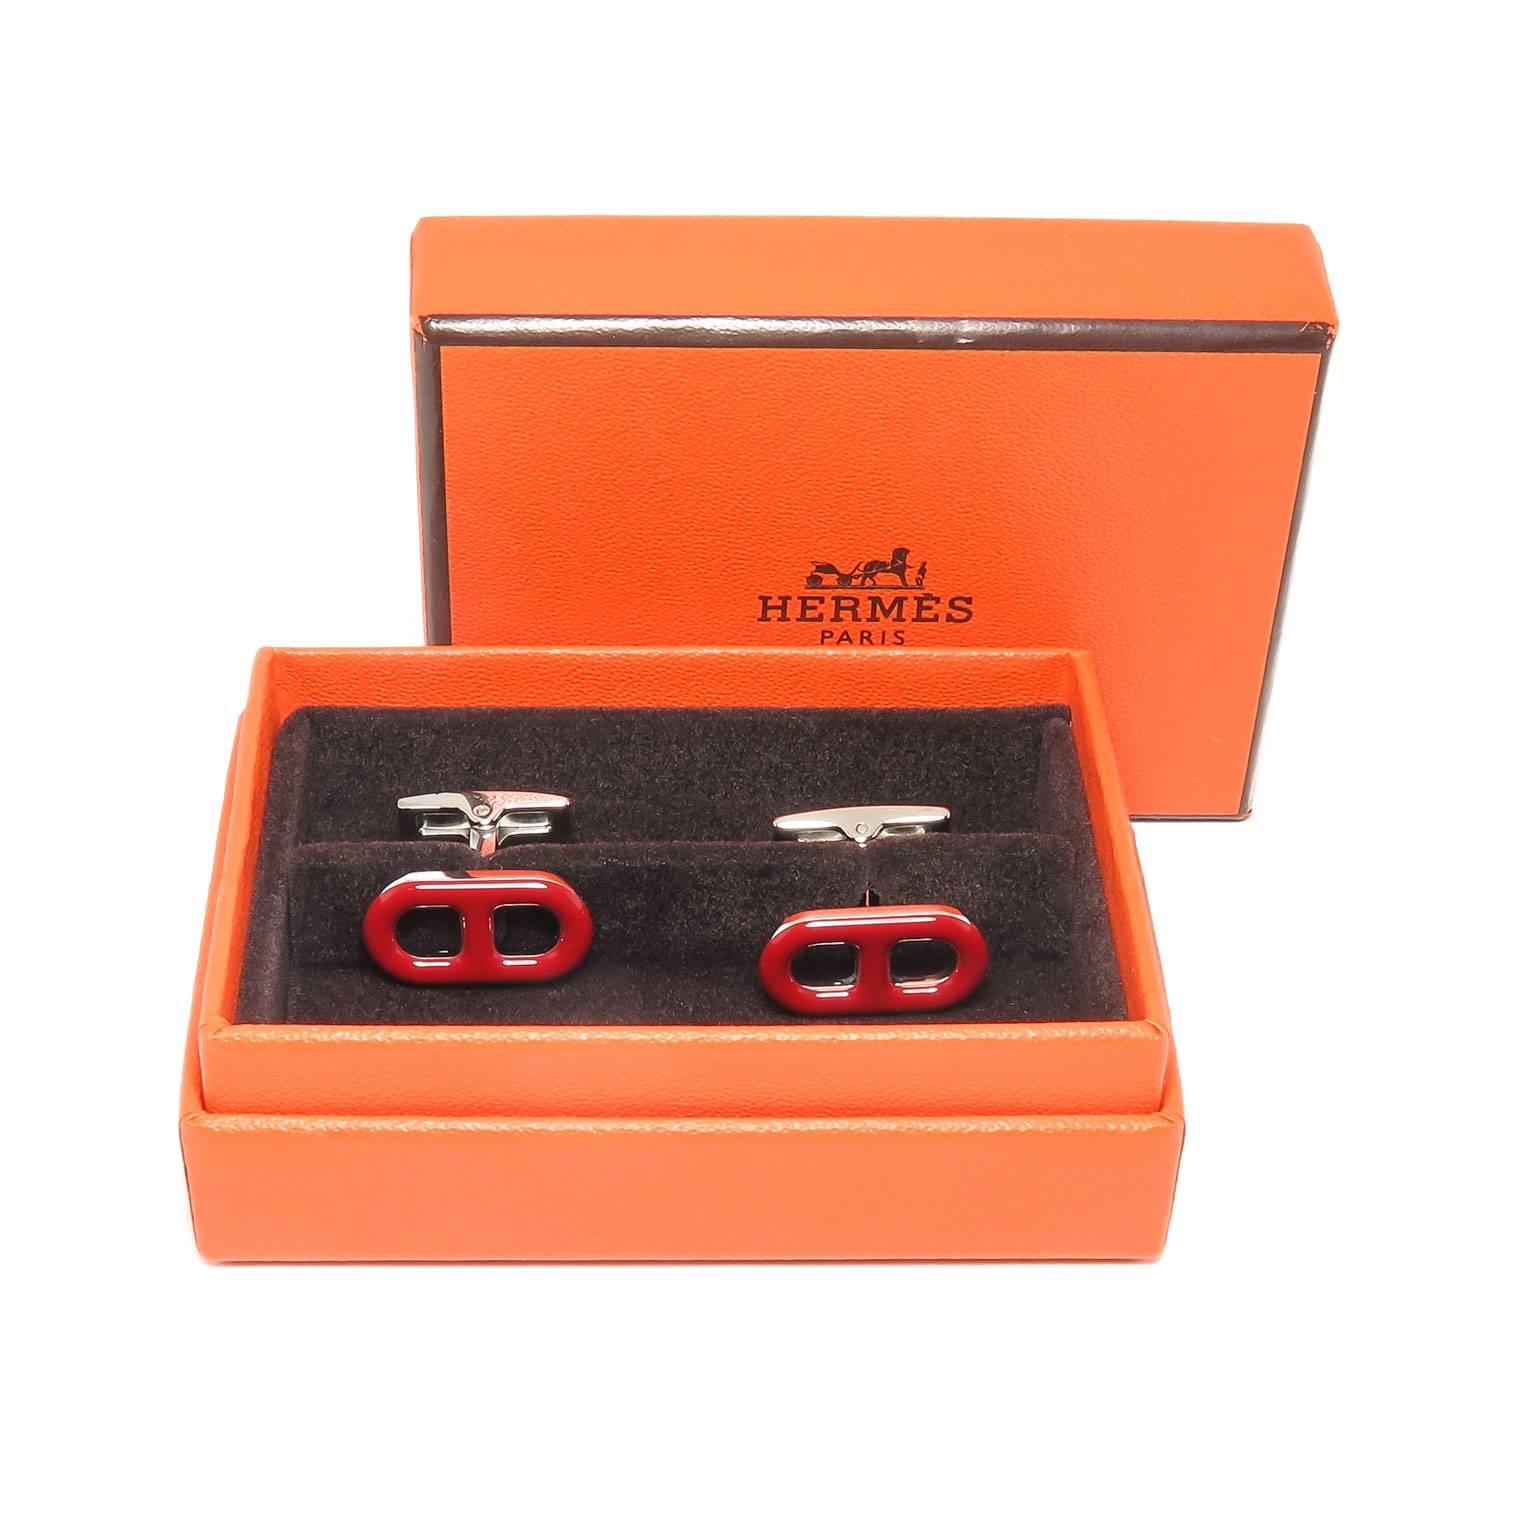 Circa 2005 Hermes Cufflinks, High Polished metal and Red Enamel, measuring 3/4 inch in length across the top, these are new old stock, never worn and come in the original Hermes Gift Box.